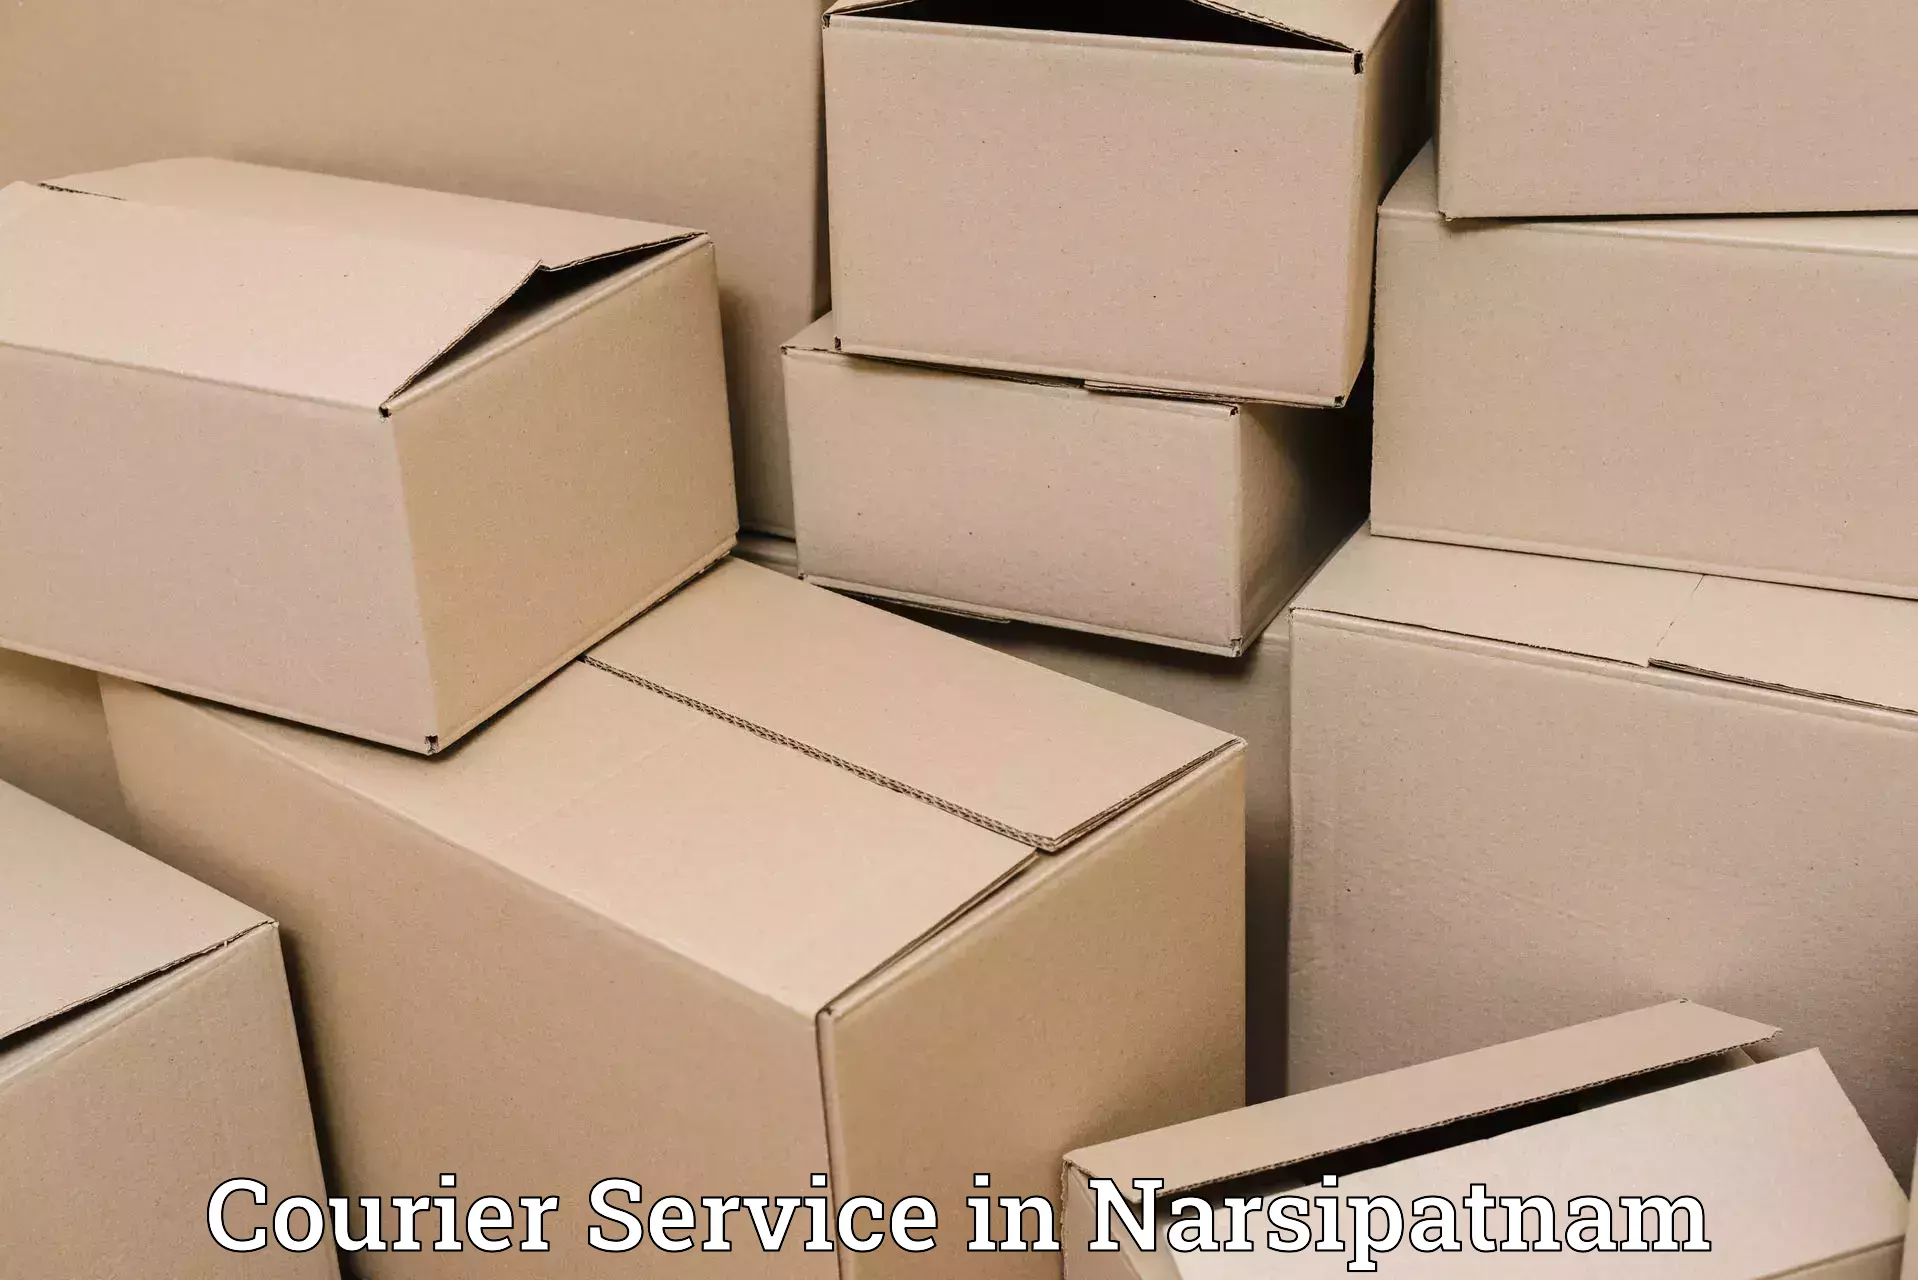 Next-generation courier services in Narsipatnam